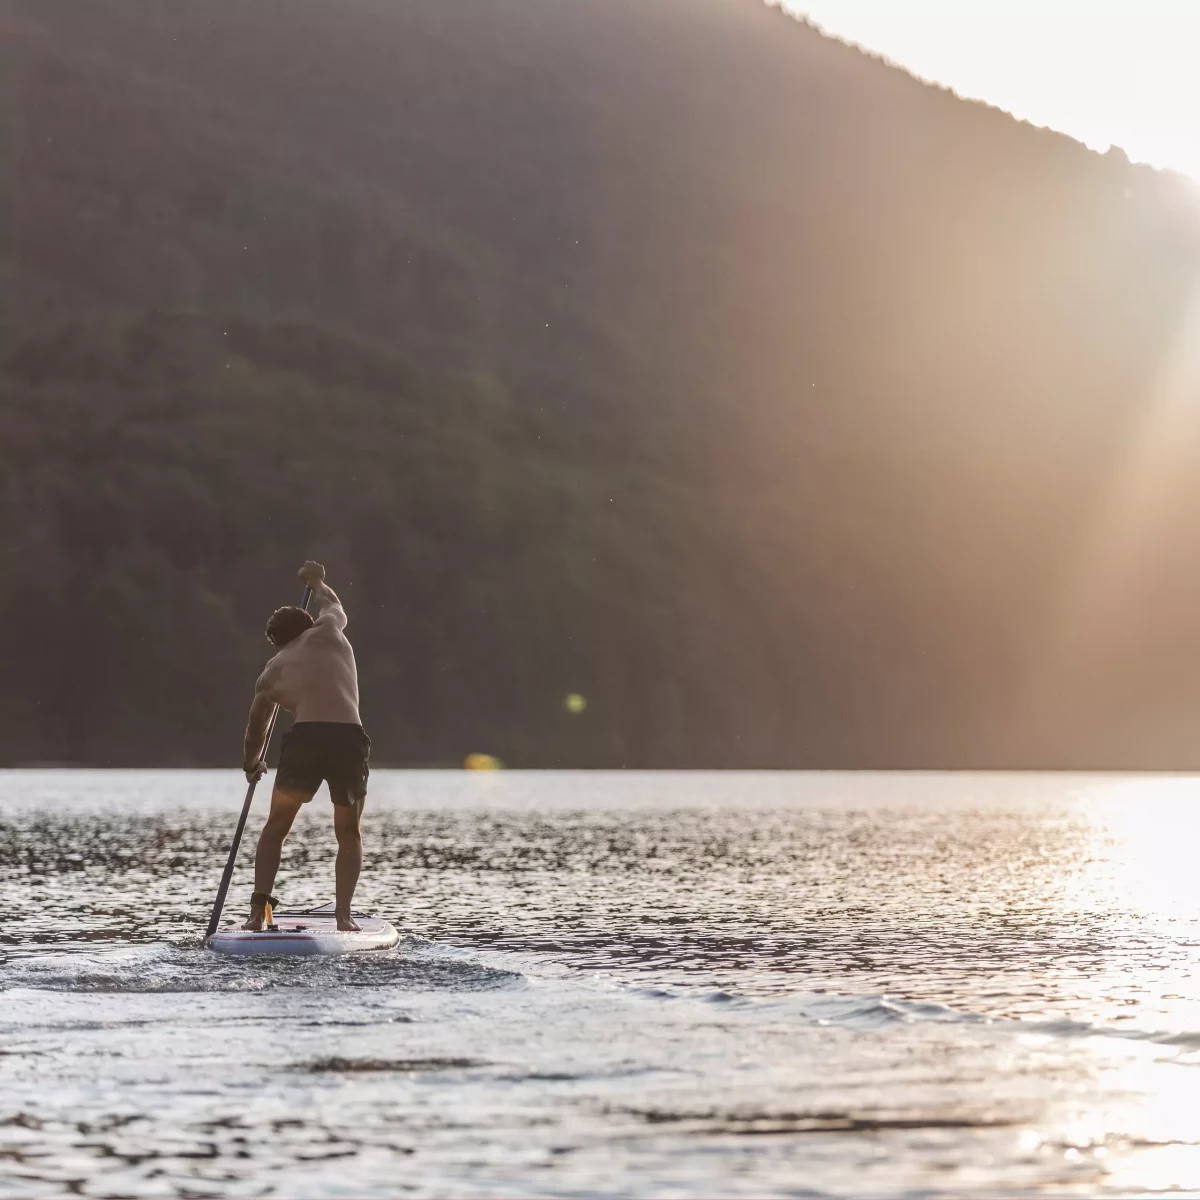 Matteo Cerutti a KISKA product management consultant paddle boarding on an Austrian alpine lake after work